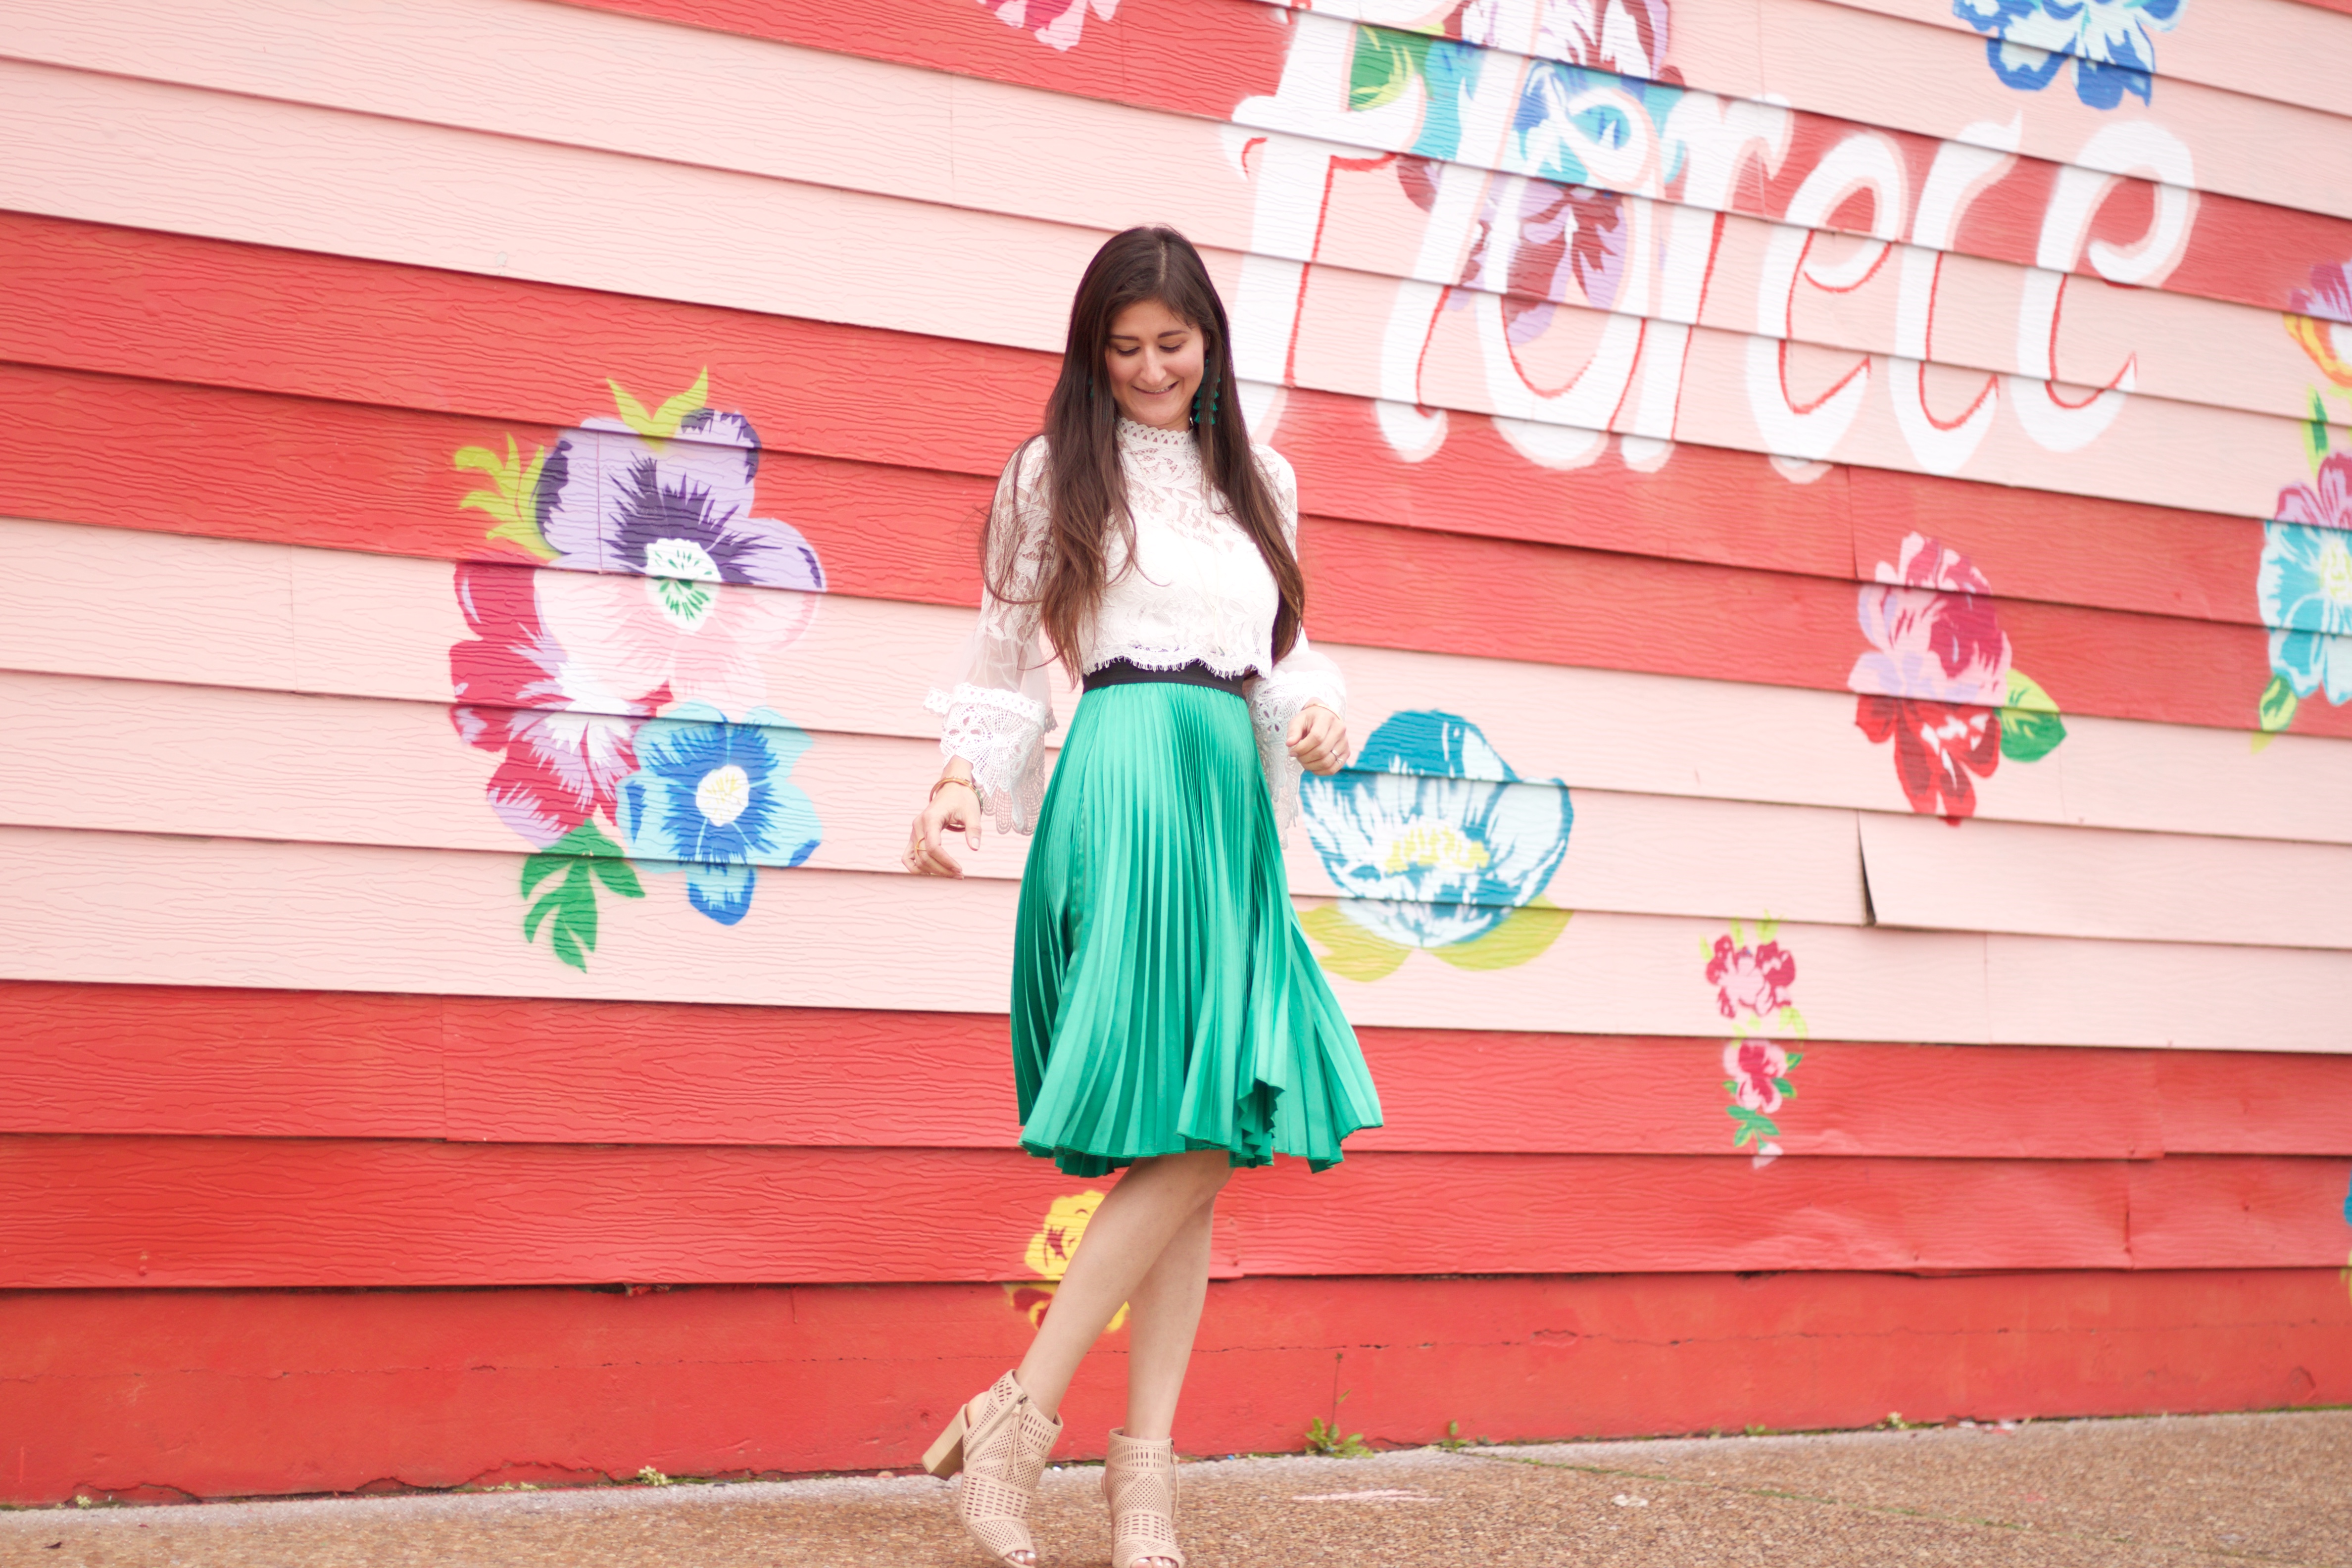 Houston blogger Jenni Metz is modeling a green pleated skirt and lace crop top